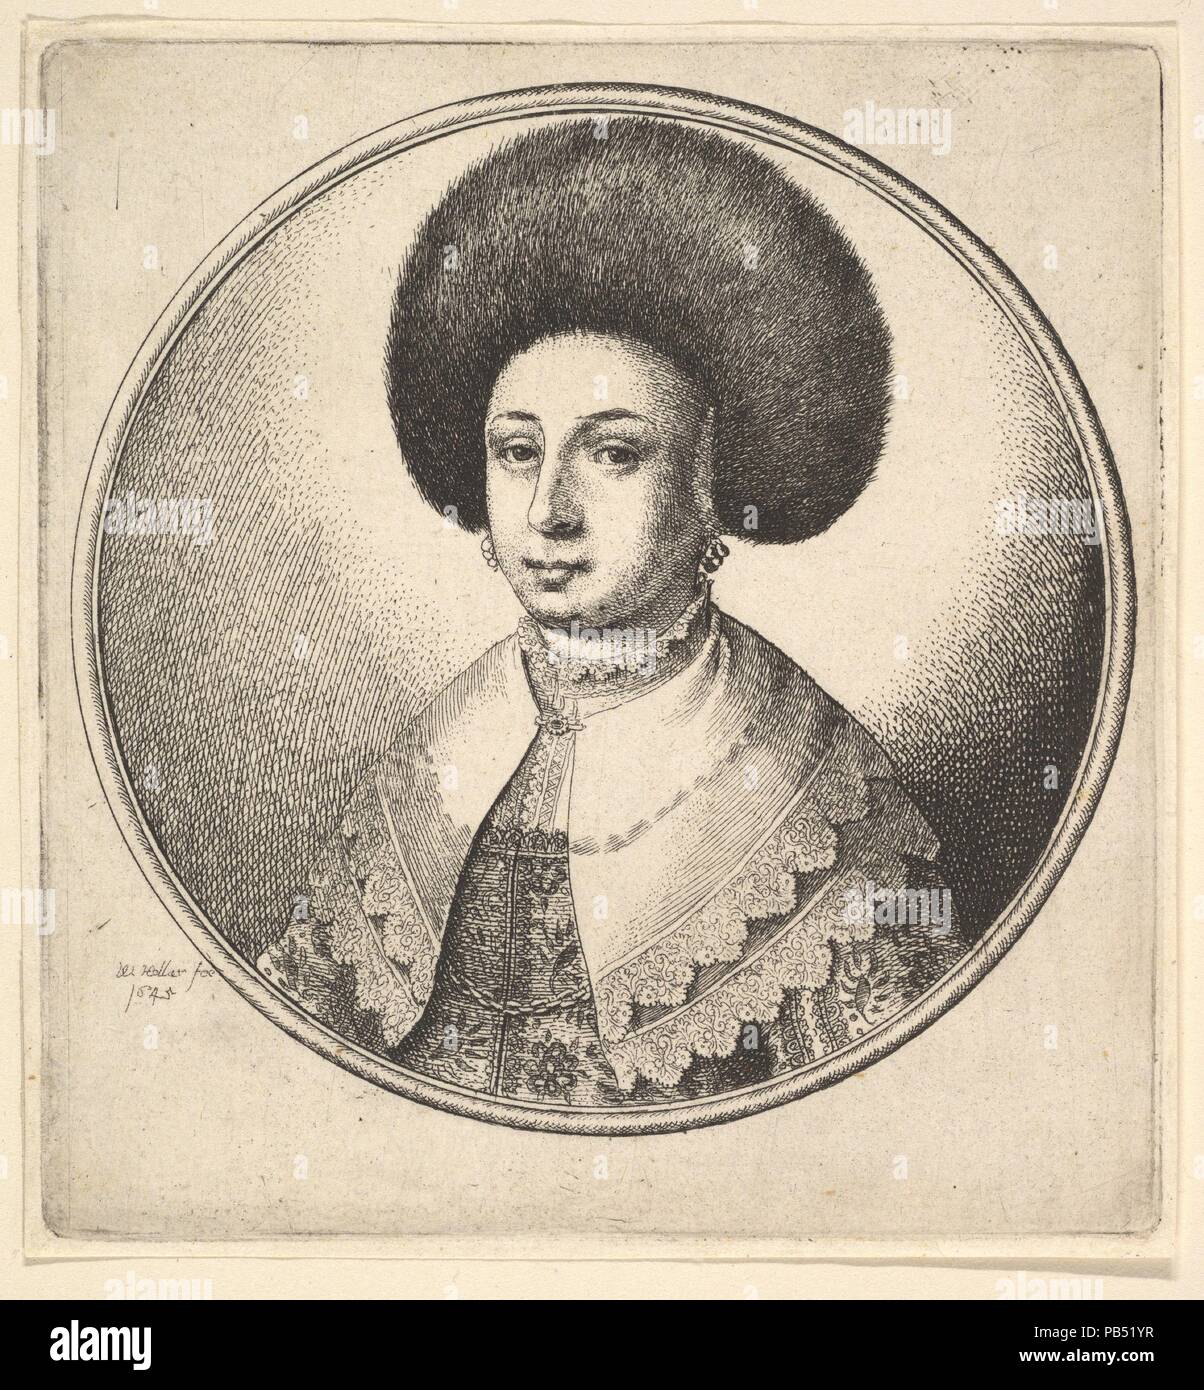 Woman with large circular fur hat and earrings. Artist: Wenceslaus Hollar (Bohemian, Prague 1607-1677 London). Dimensions: Plate: 4 × 3 3/4 in. (10.2 × 9.6 cm). Series/Portfolio: Women's heads framed in roundels  Thirteen plates. Date: 1645.  A woman shown bust-length, directed left; wearing a fur cap, earrings, shoulder wrap with double lace border, fastened with brooch, over brocaded gown, with a chain showing beneath the wrap. Museum: Metropolitan Museum of Art, New York, USA. Stock Photo